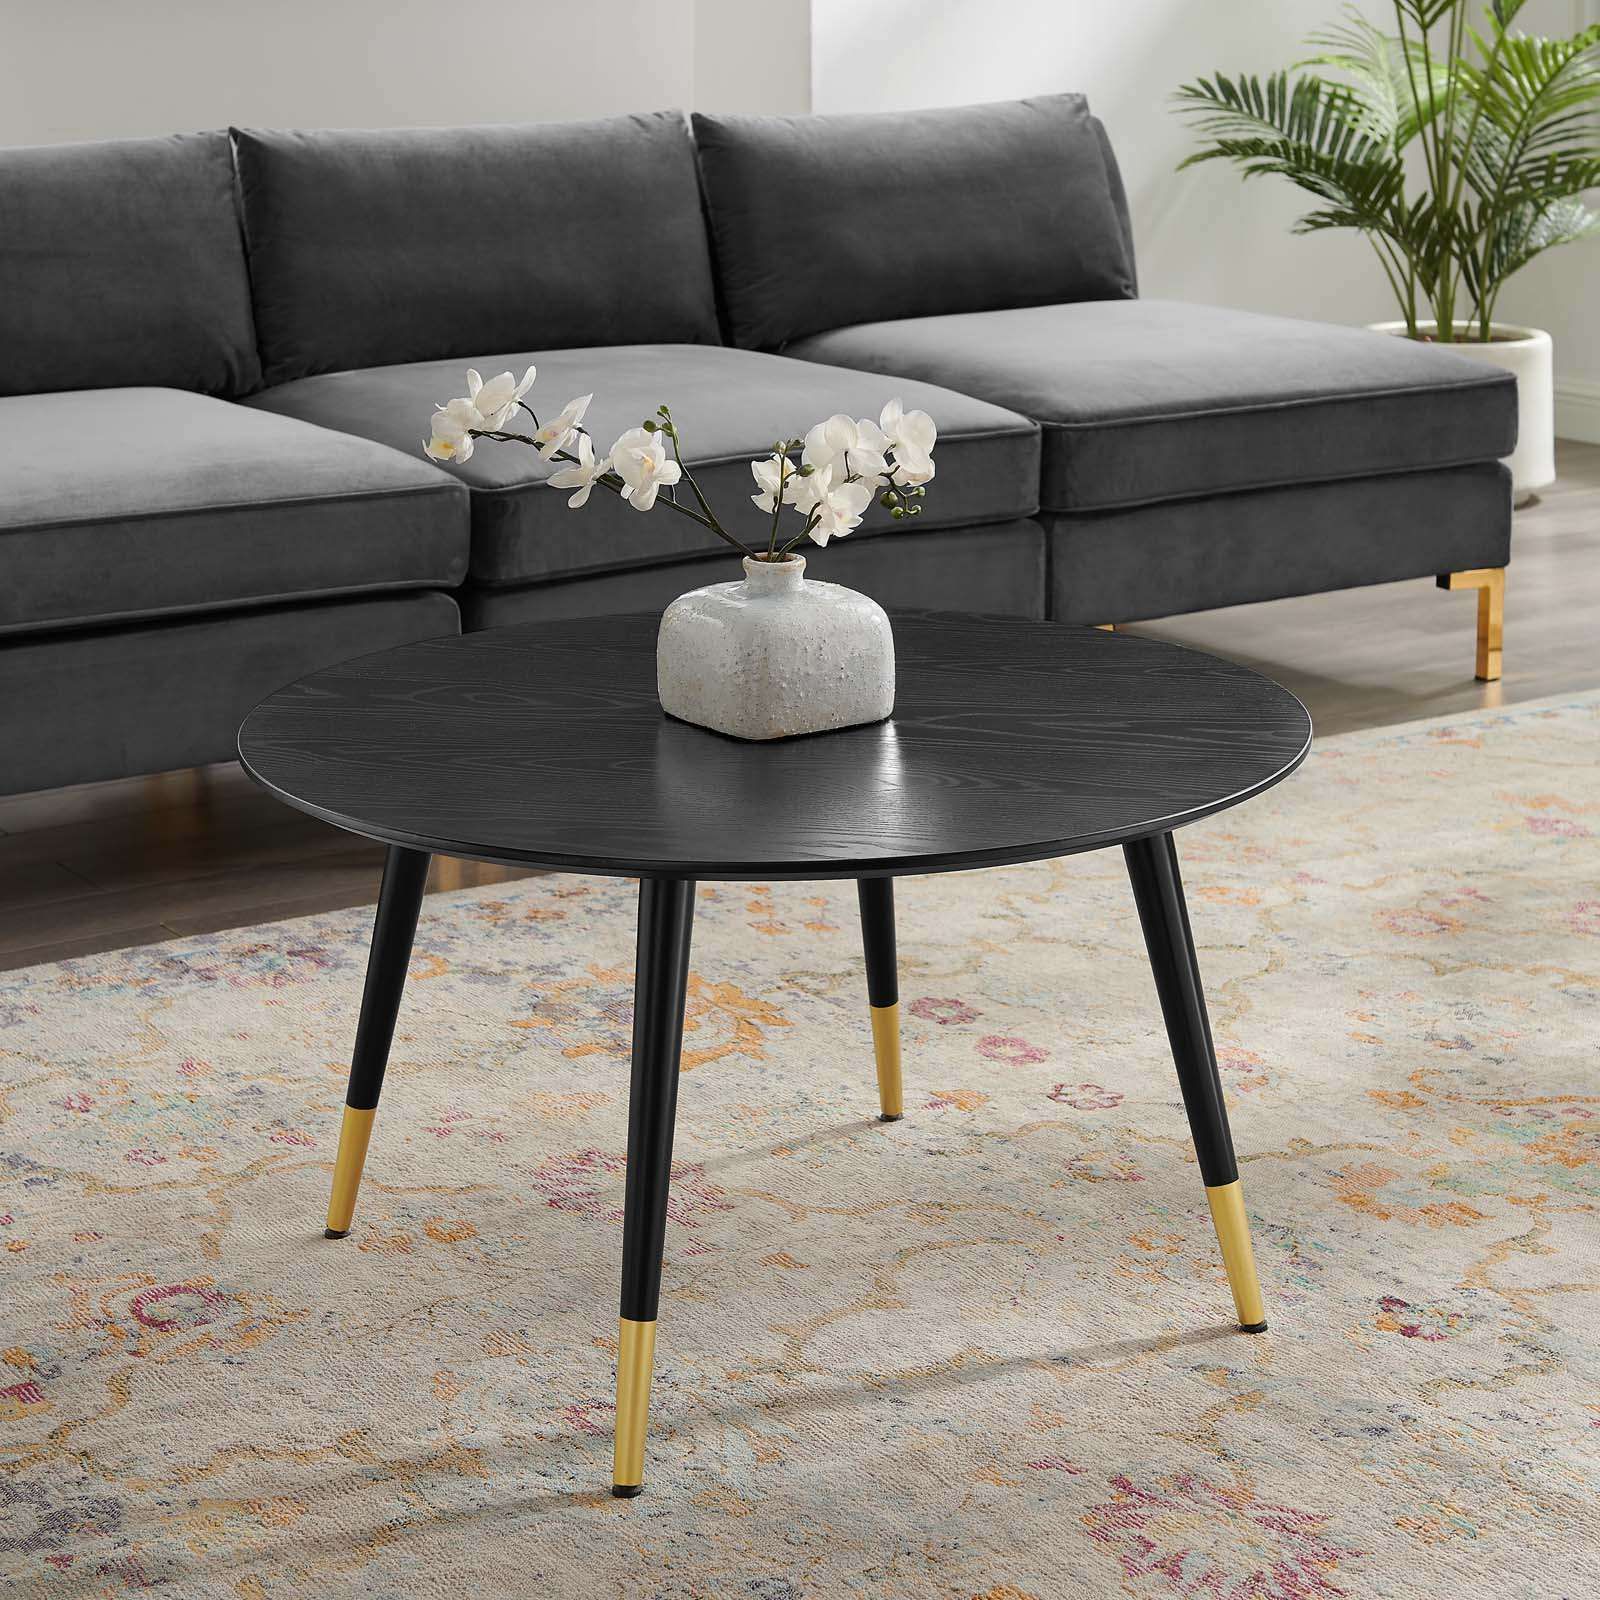 Full Black Round Coffee Tables With Well Known Modterior :: Living Room :: Coffee Tables :: Vigor Round Coffee Table (View 7 of 15)